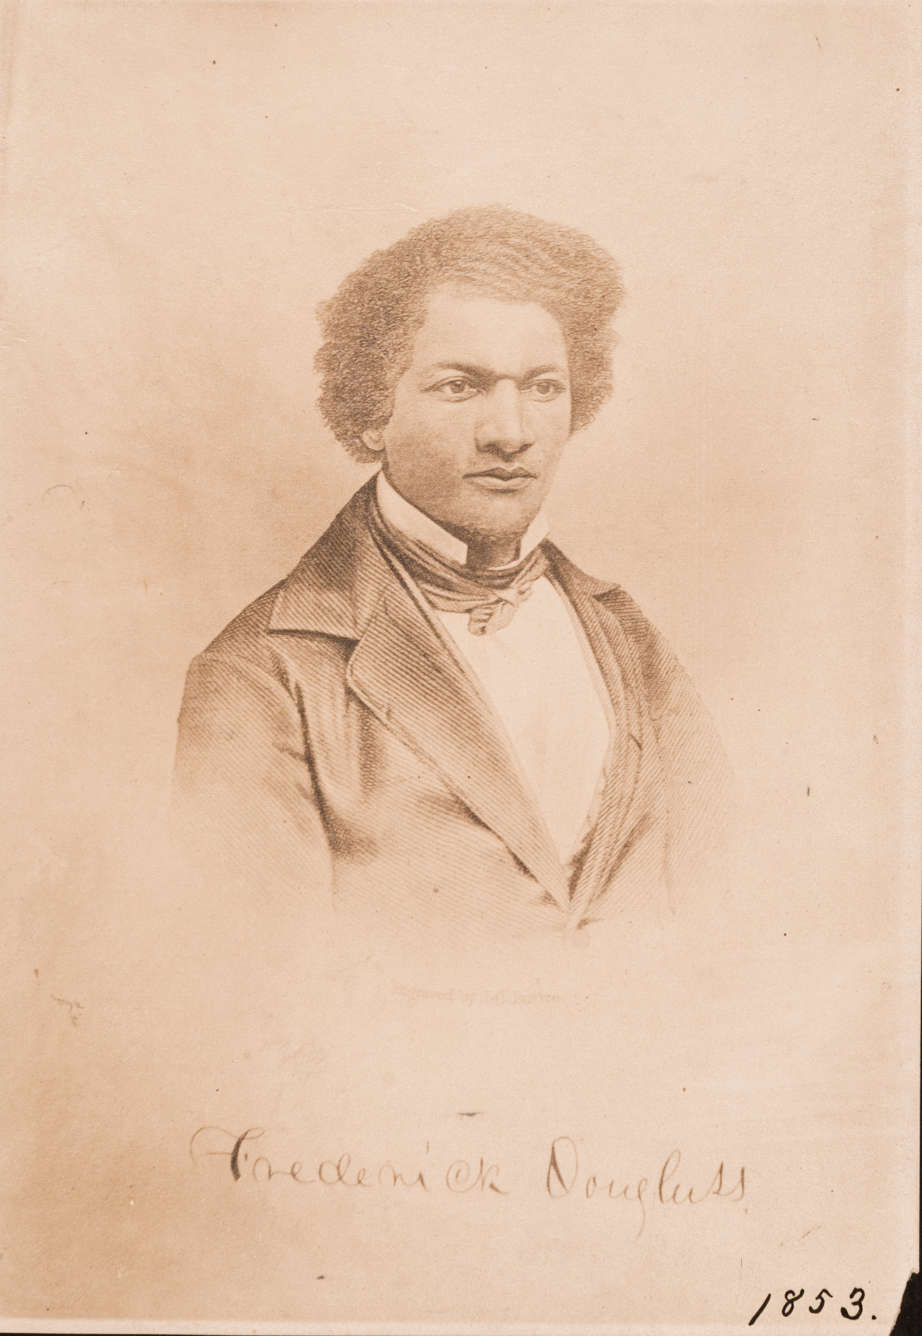 Engraving of Frederick Douglass by John Chester Buttre, 1853